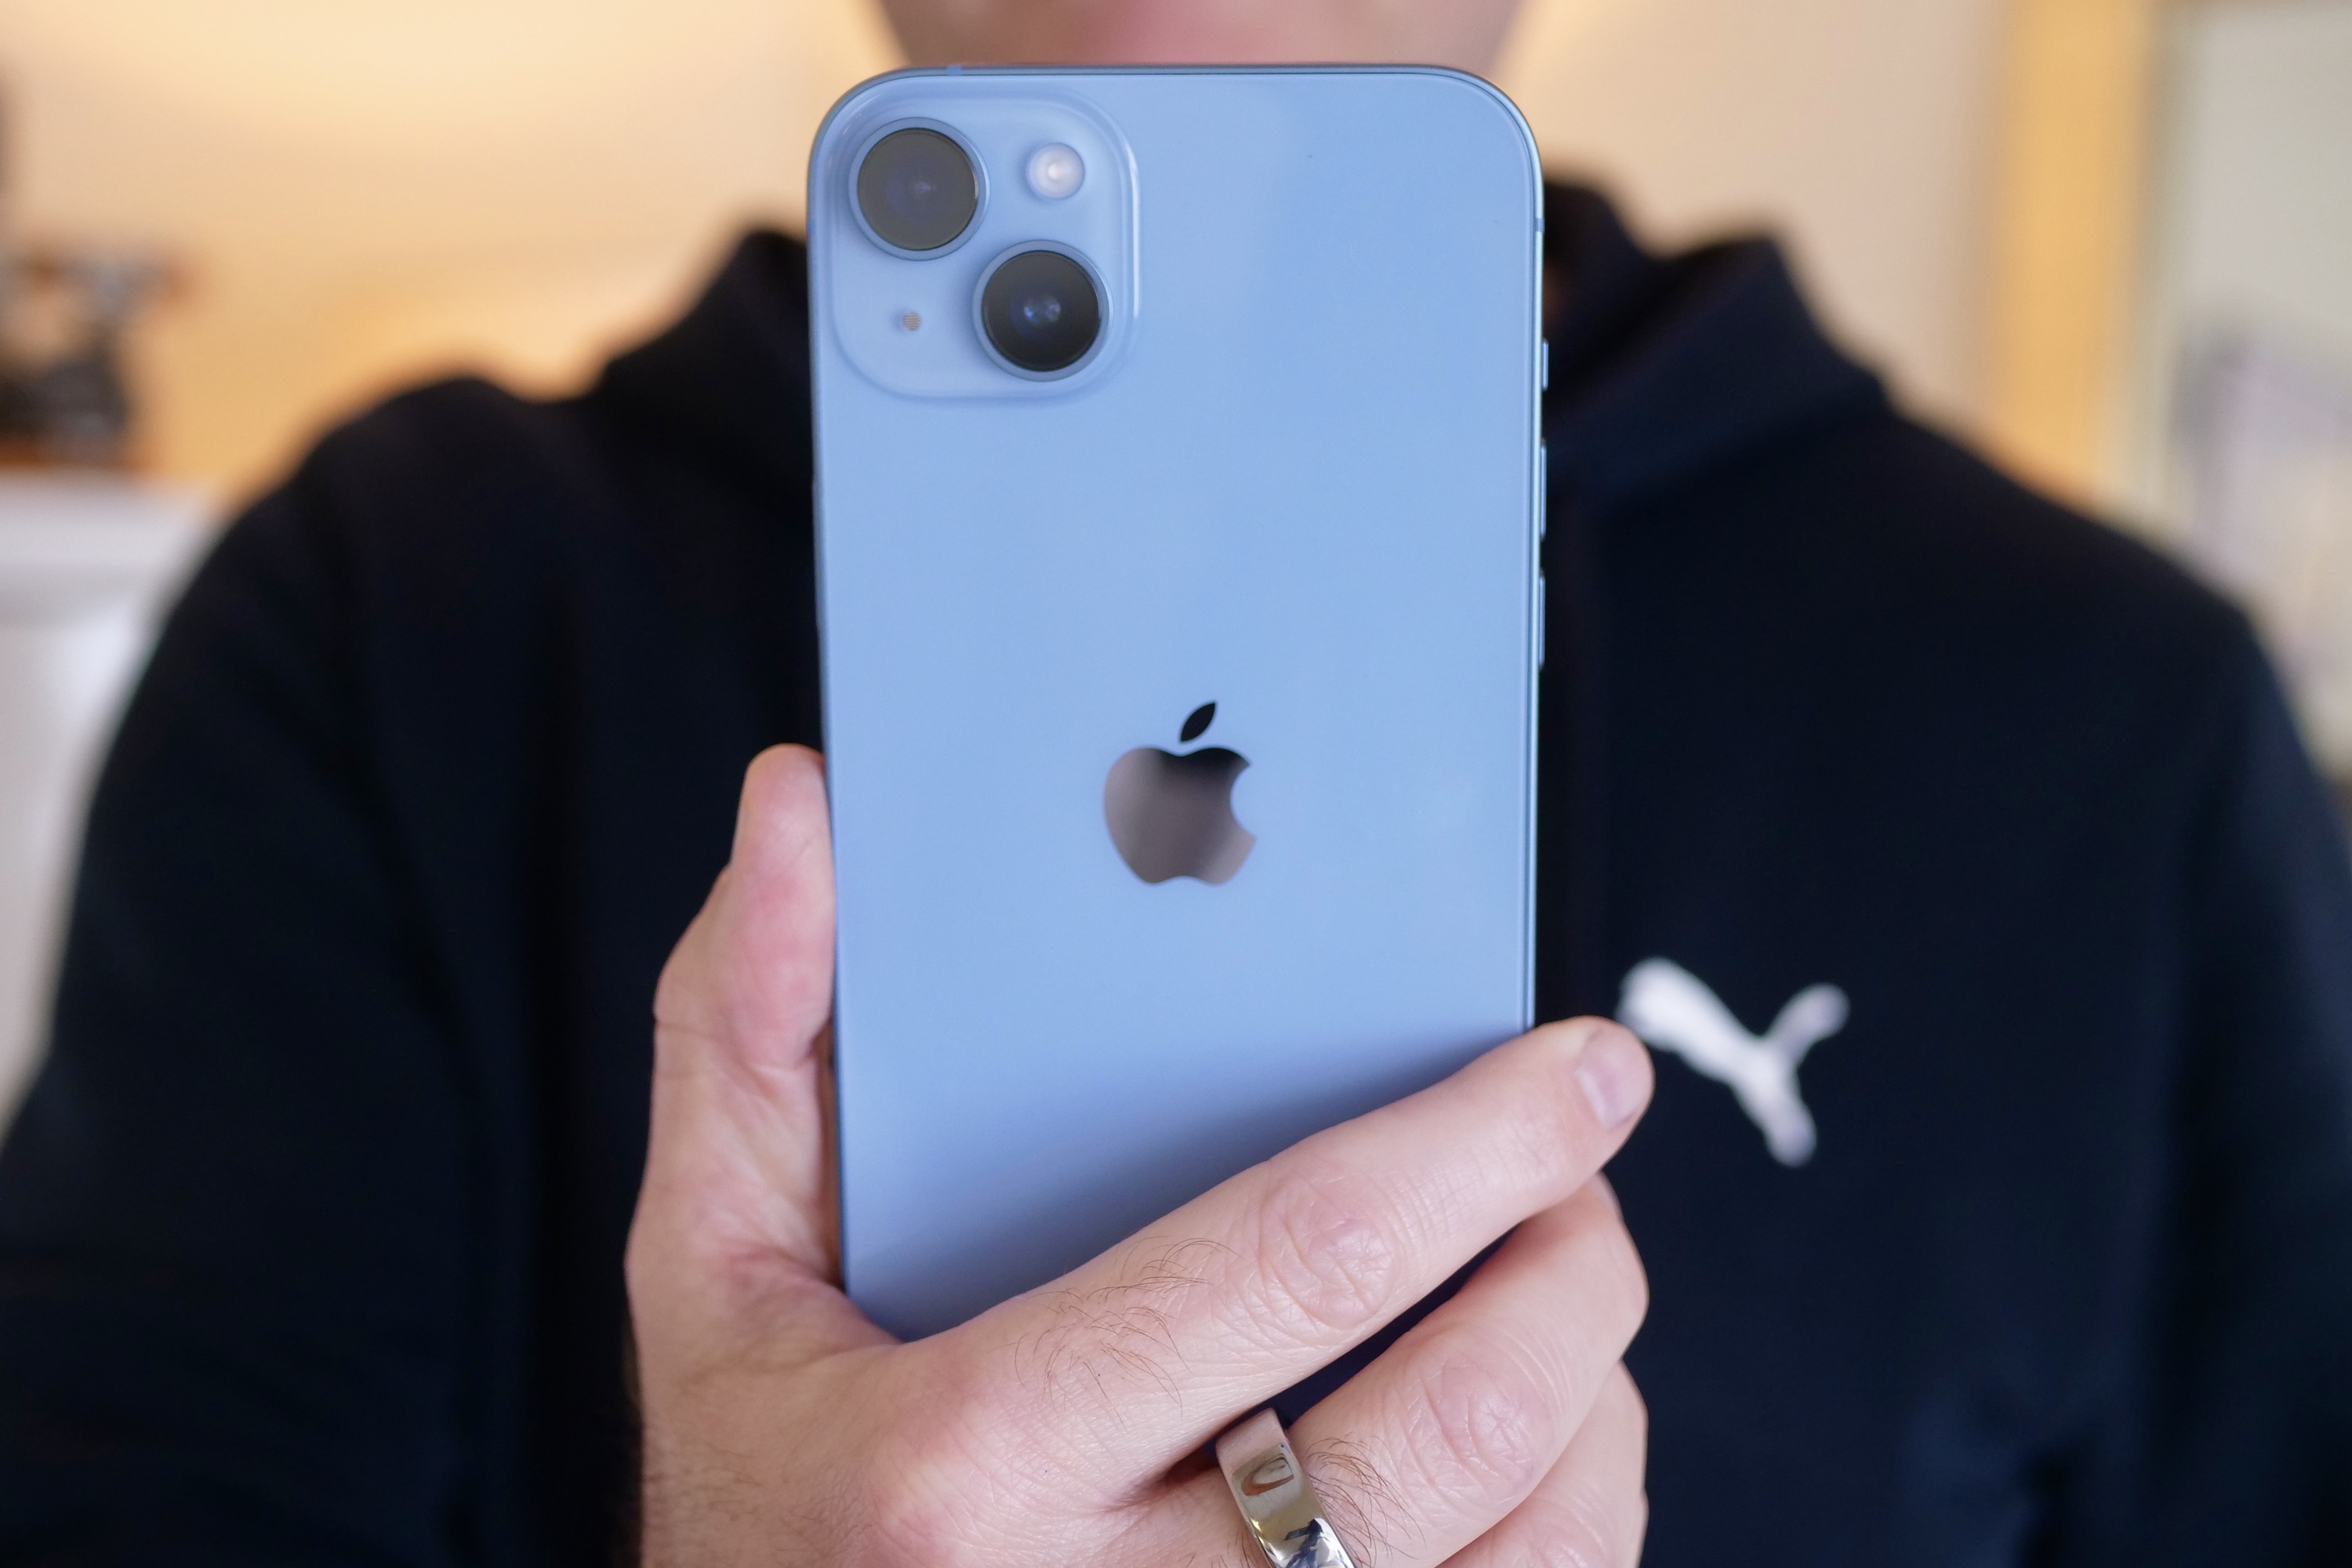 iPhone 15 Pro: Should You Wait Or Buy iPhone 14 Pro Now? - News18